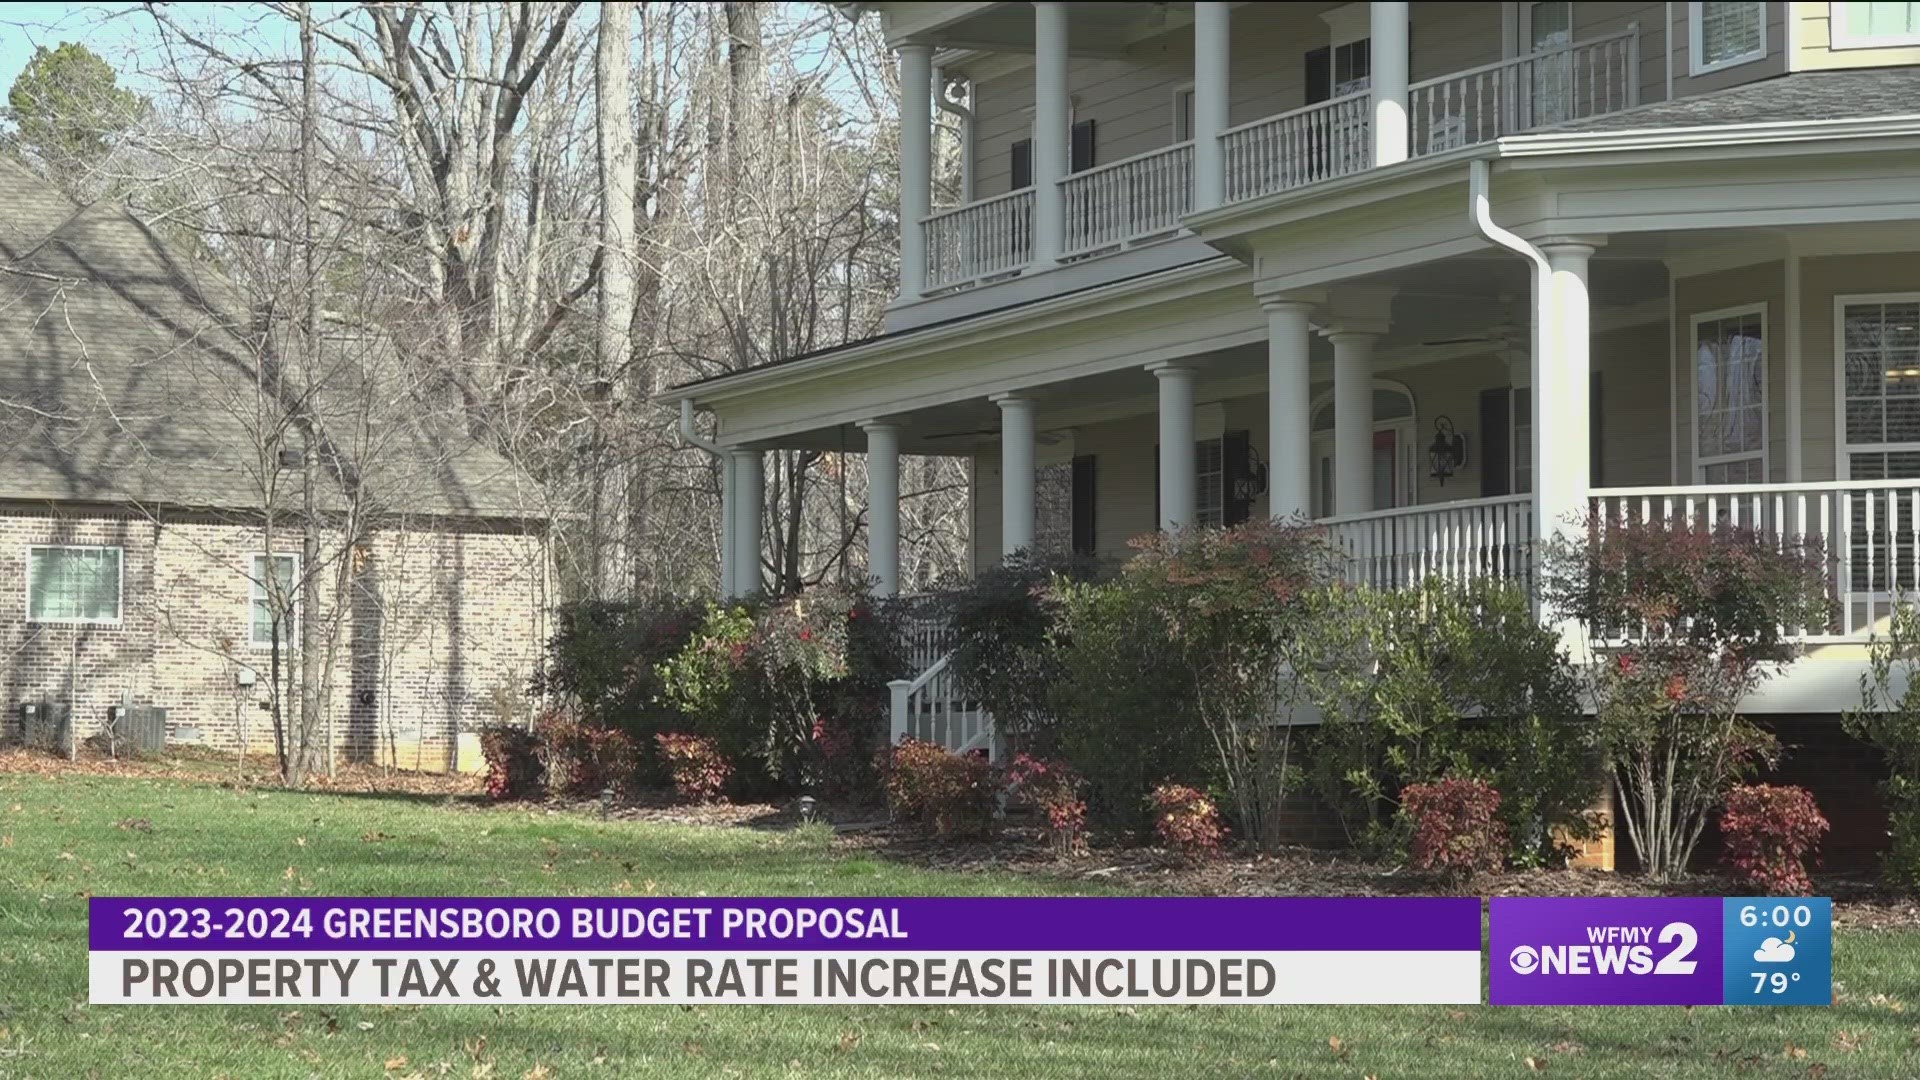 The City of Greensboro proposed raising property taxes and water bills in the 2023-2024 city budget.